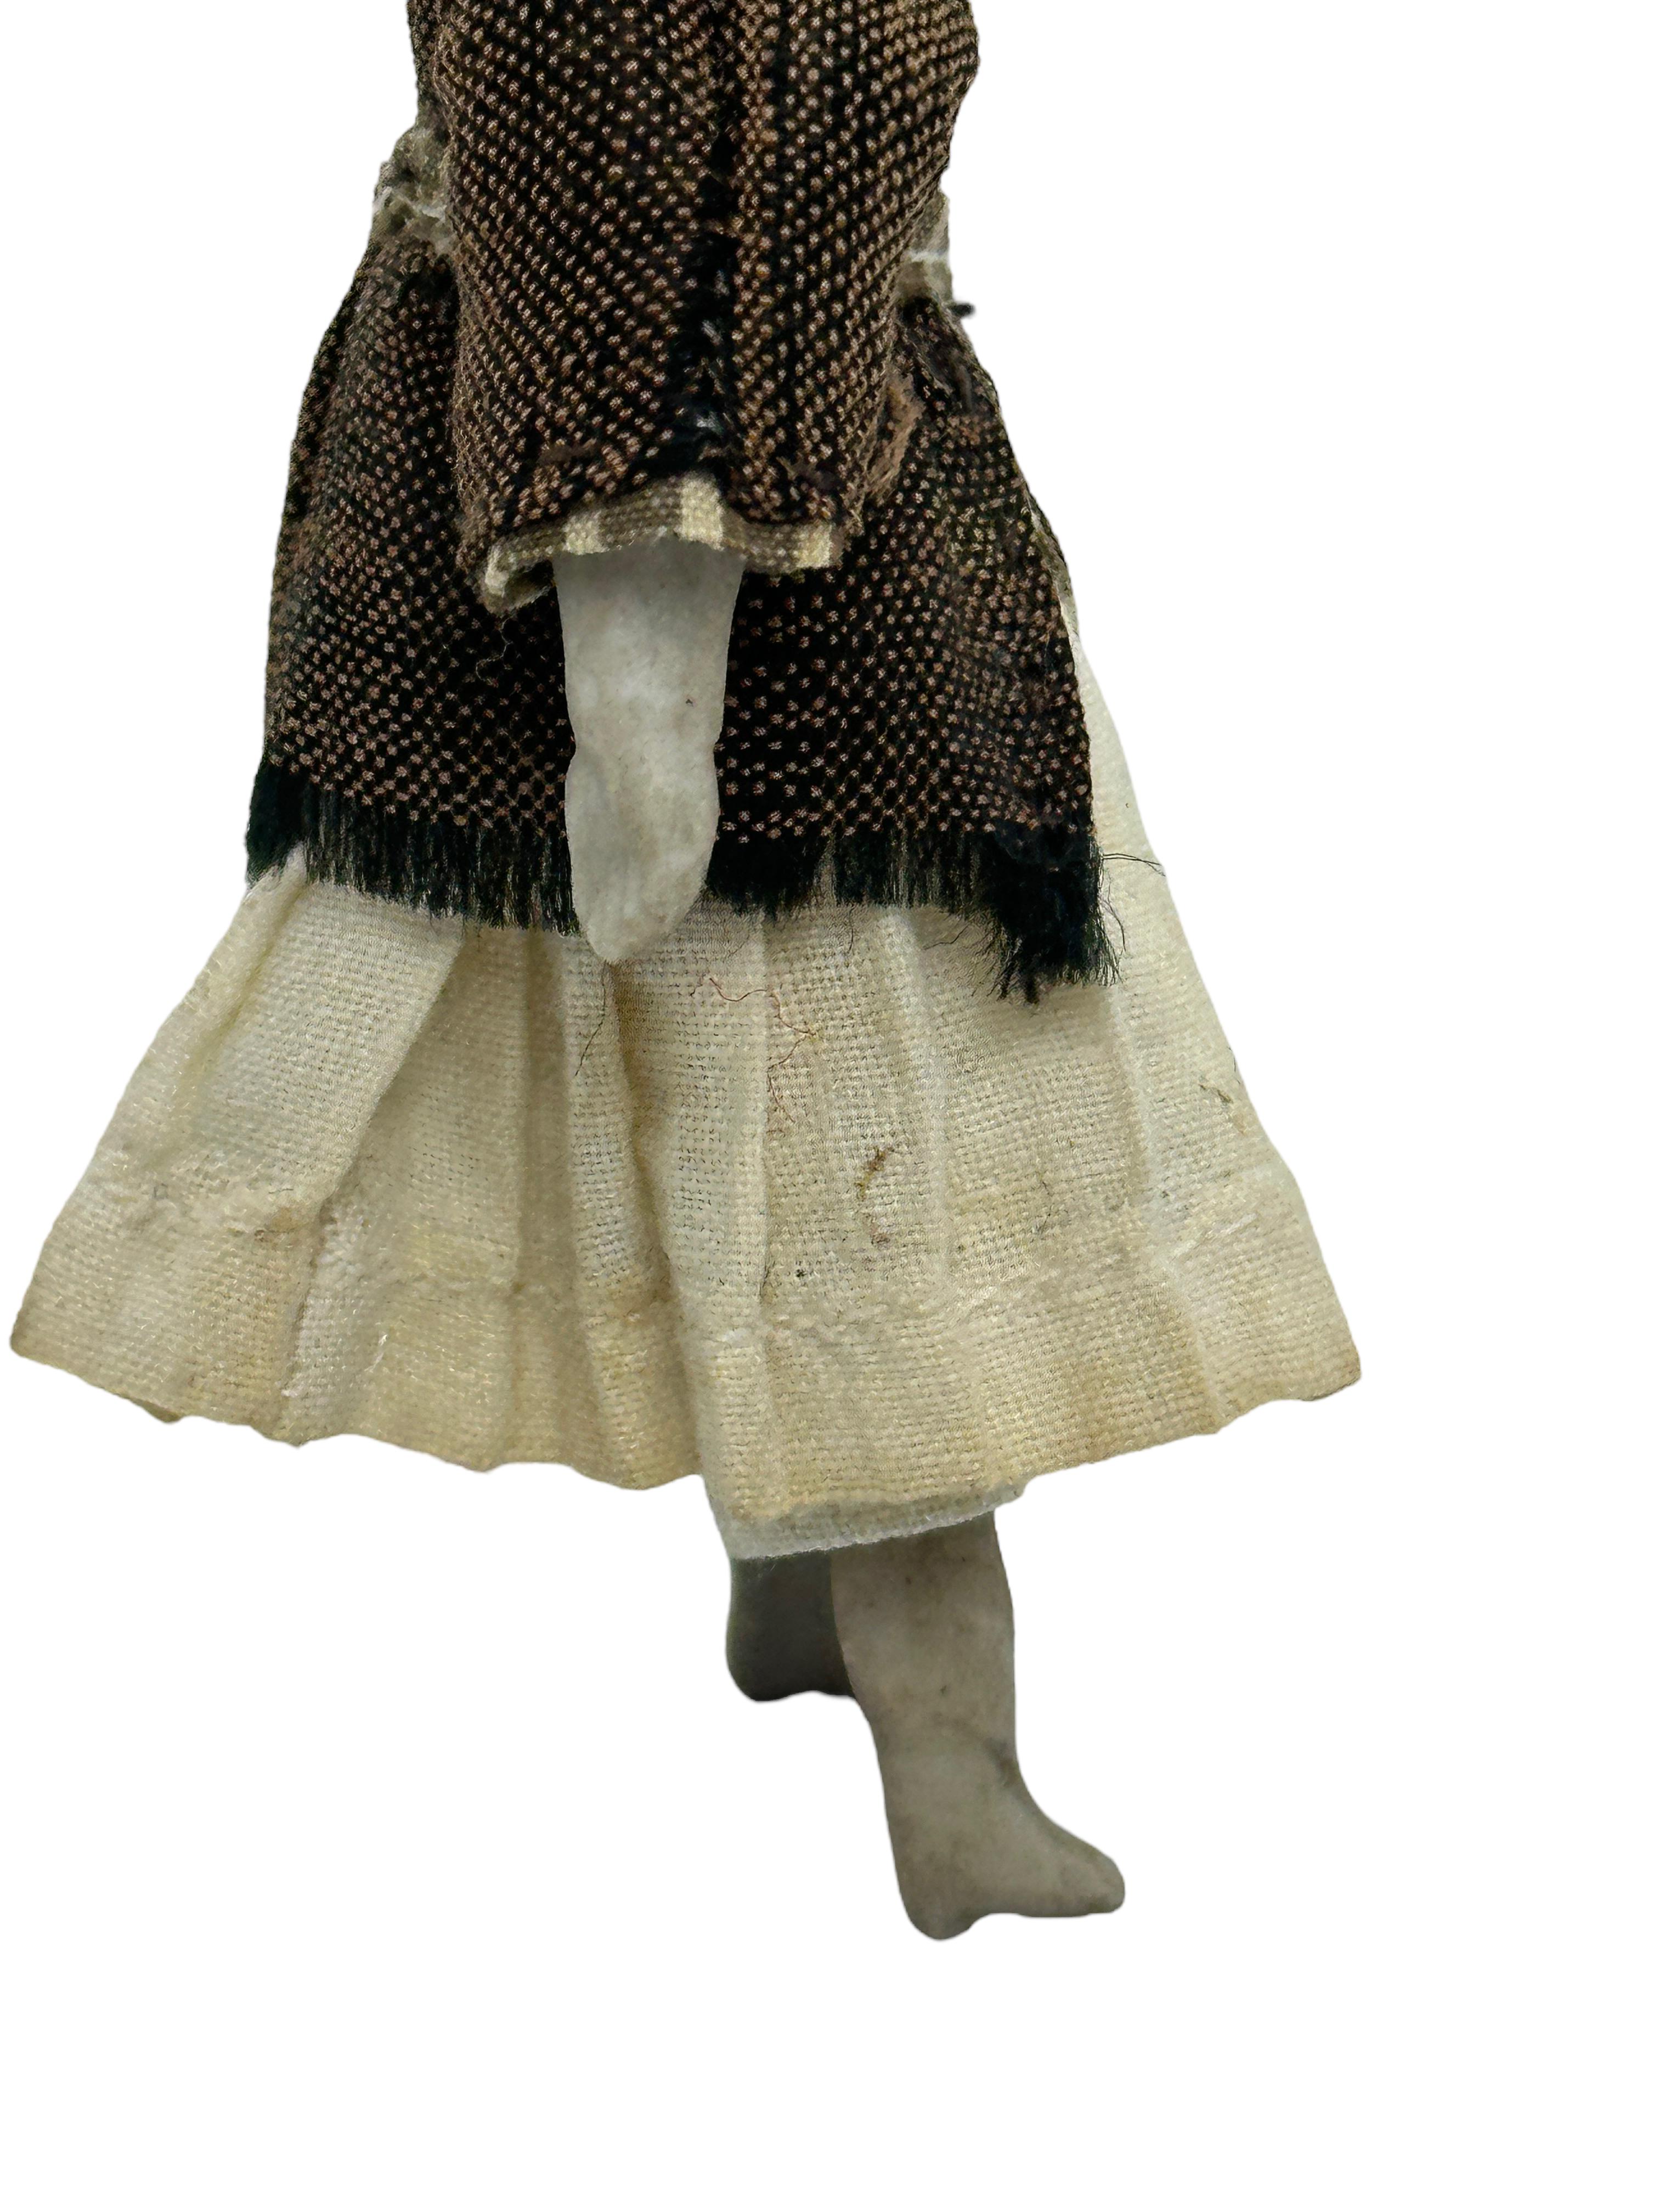 Girl in beautiful Dress, Antique German Dollhouse Doll Toy 1900s For Sale 1